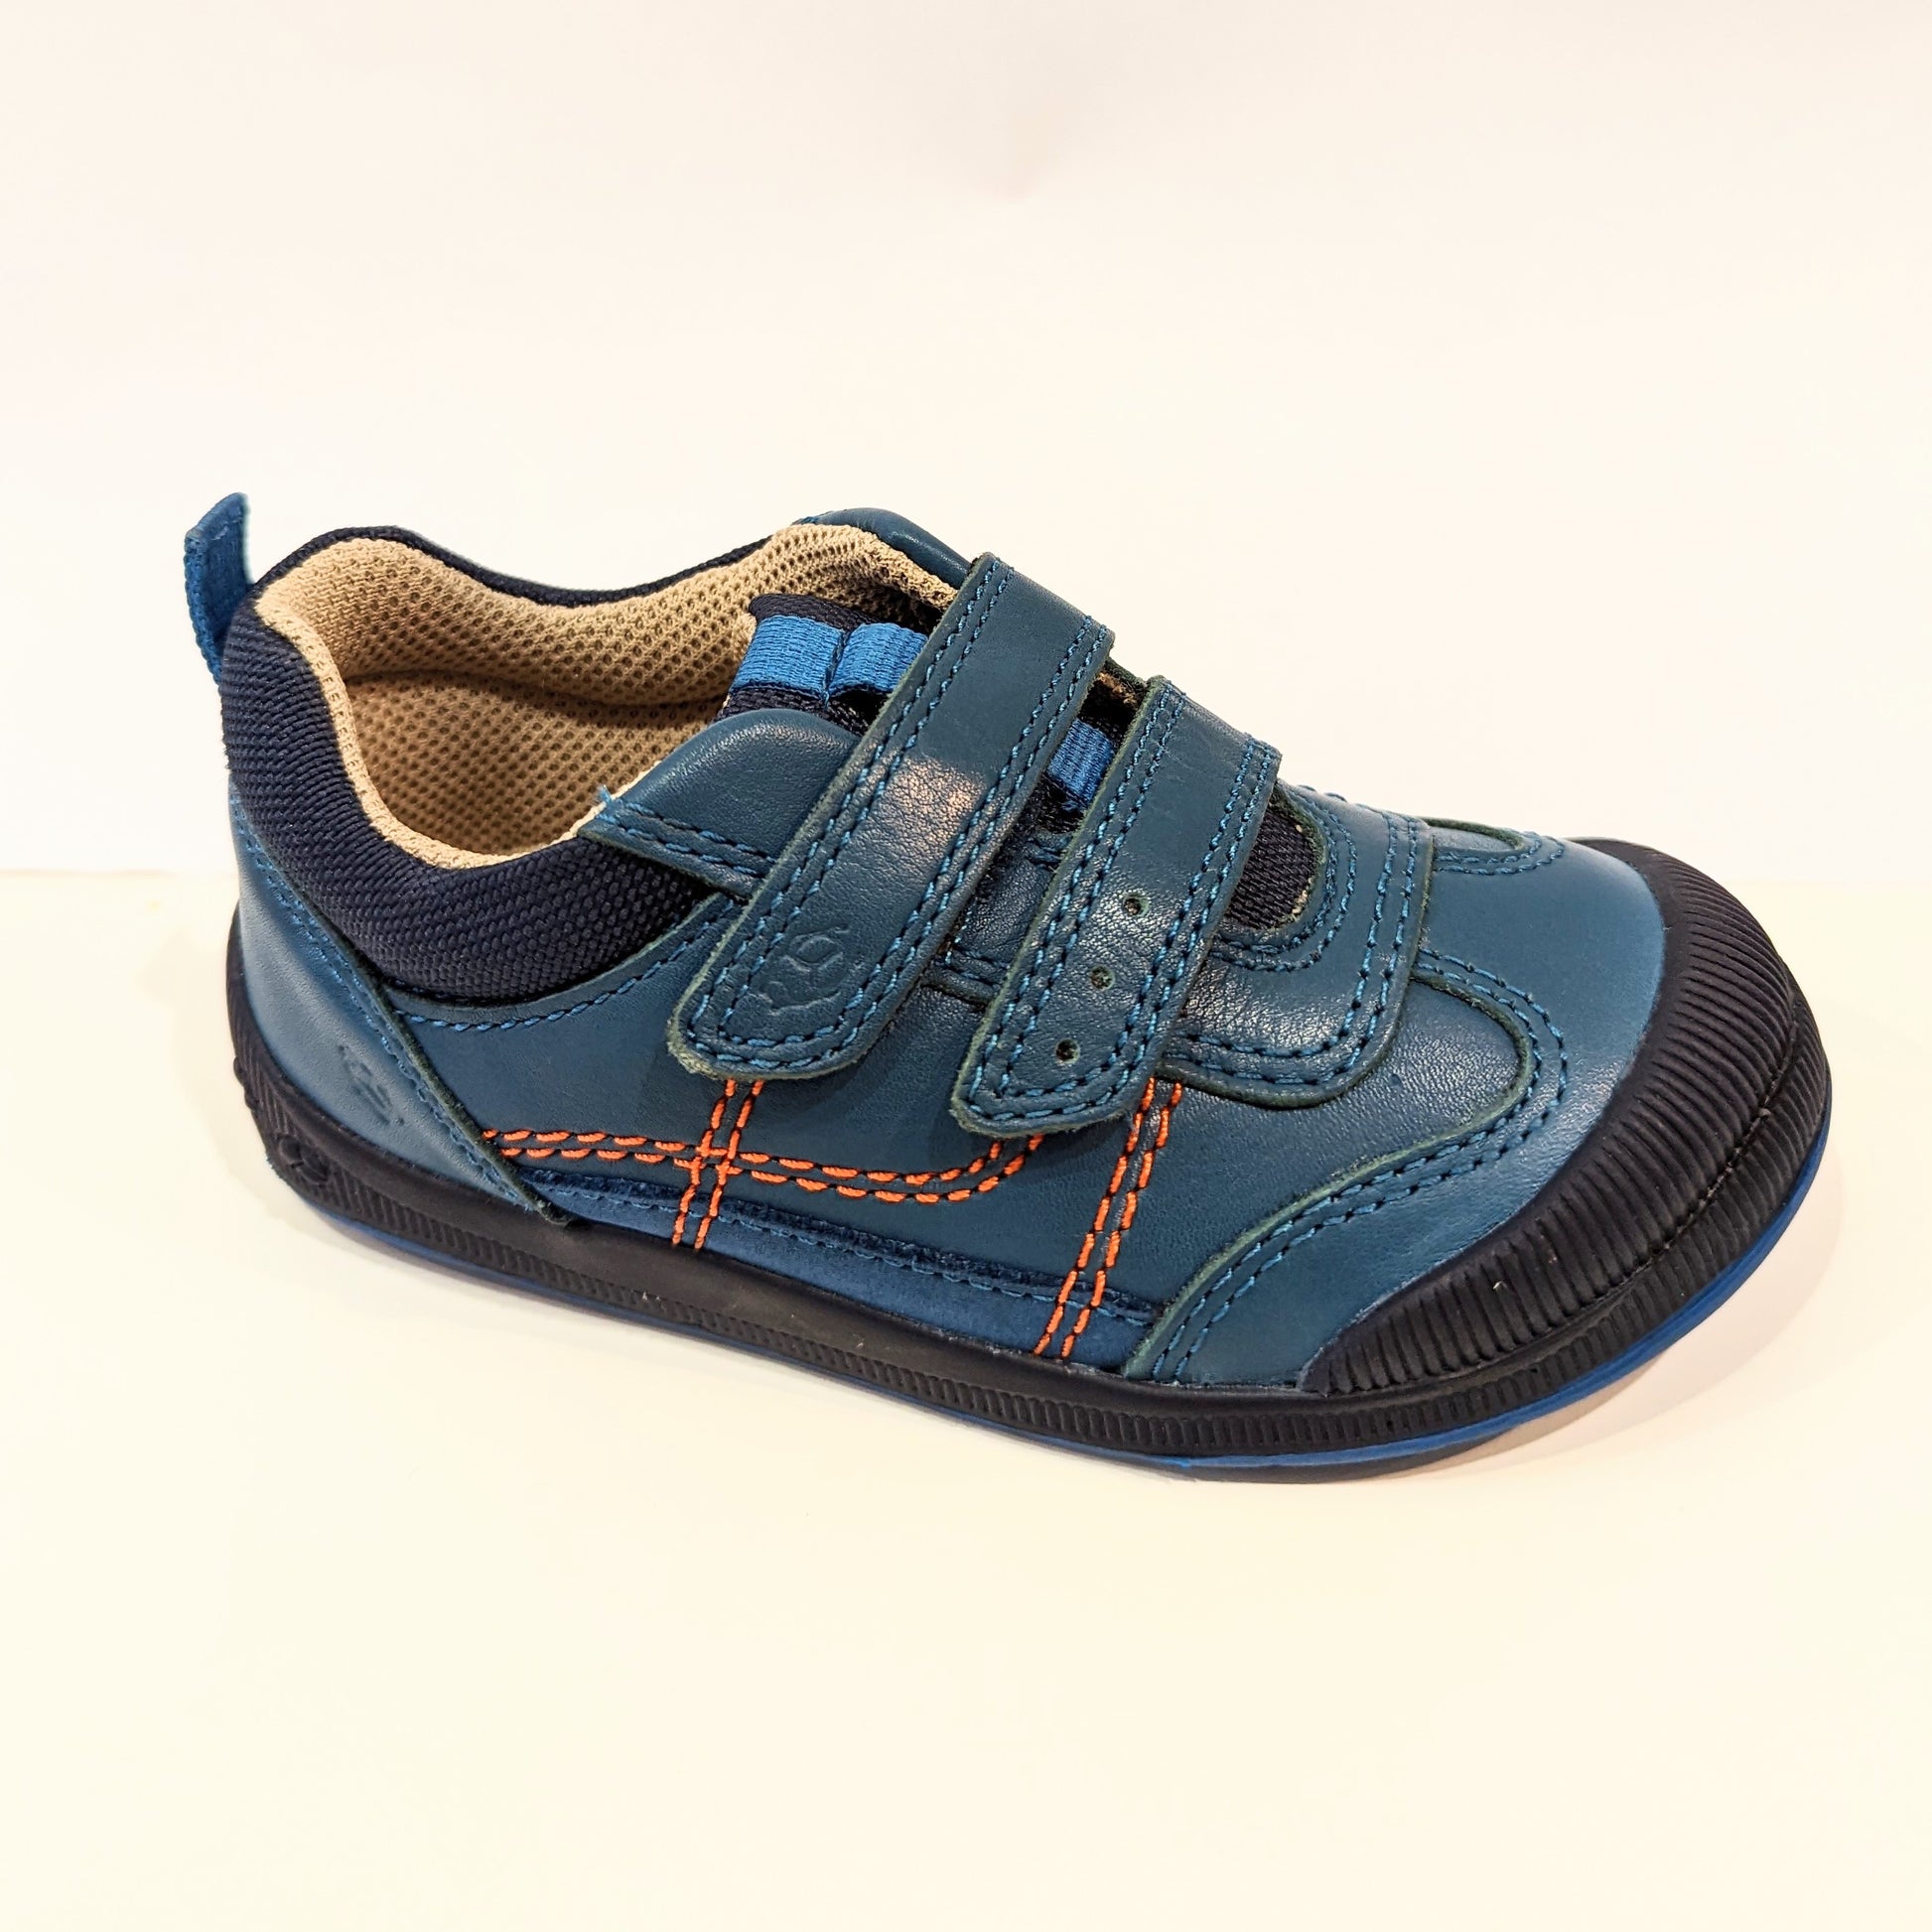 A boys casual shoe by Start Rite, style Tickle, in teal leather with double velcro fastening. Angled view.